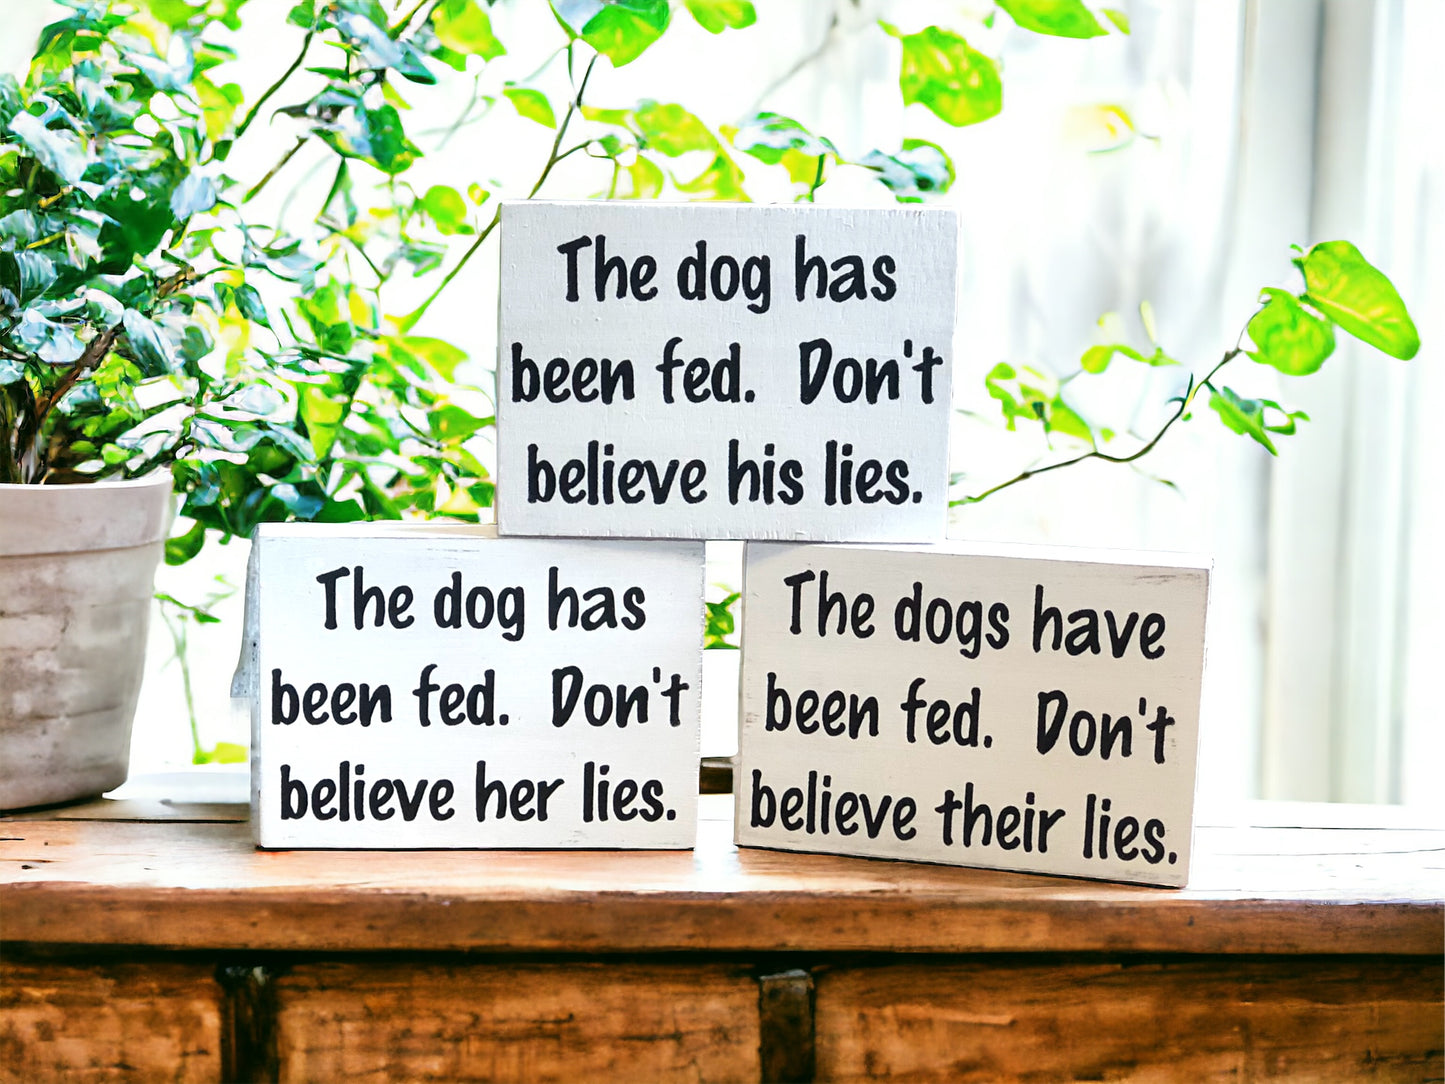 Dog has been fed - Funny Rustic Wood Dog Shelf Sitter Signs